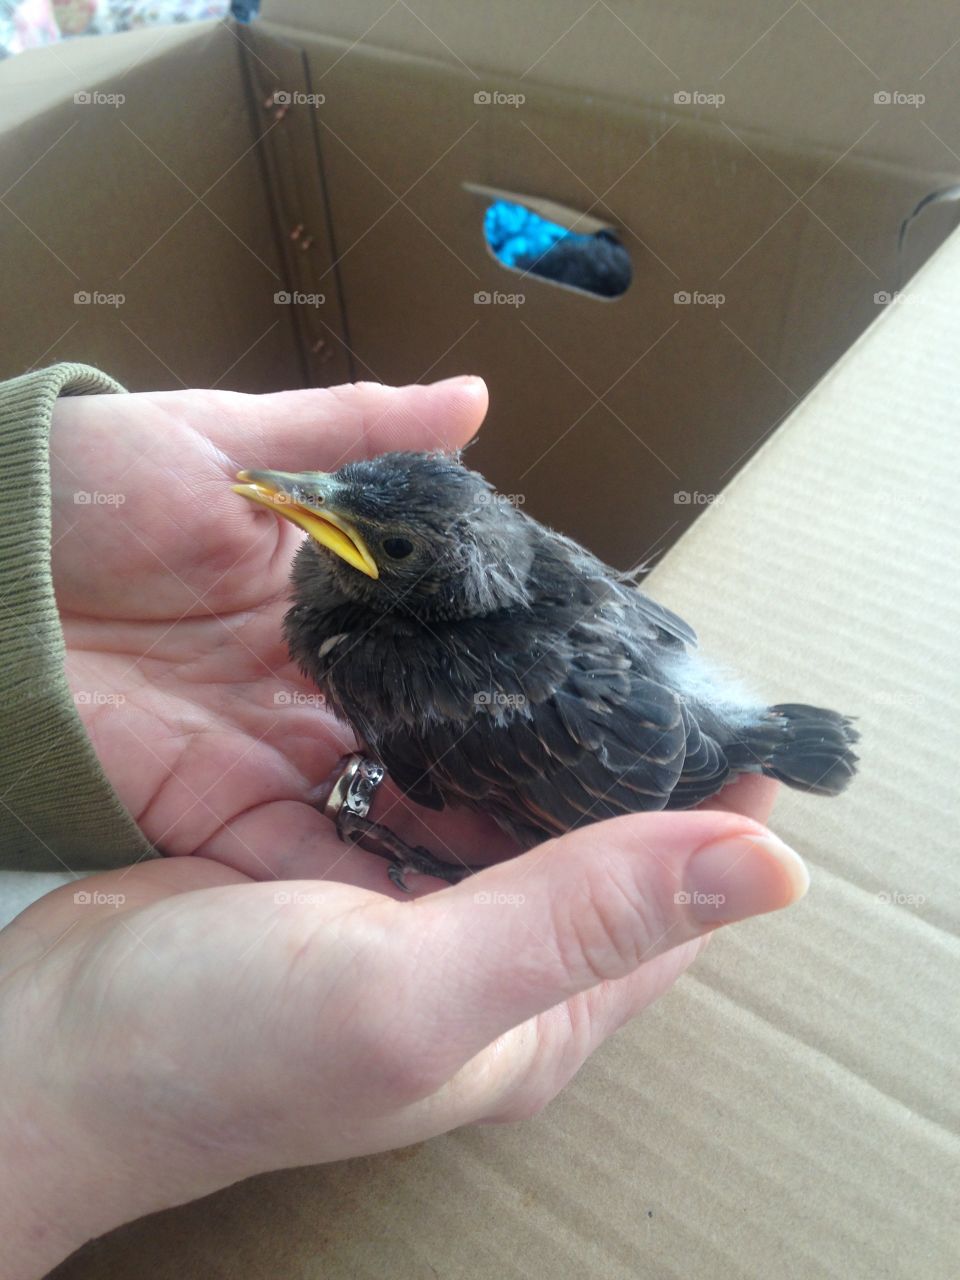 Kiki, a rescued fledgling starling who fell out of her nest on a city street, recovering nicely from dehydration and extreme hunger